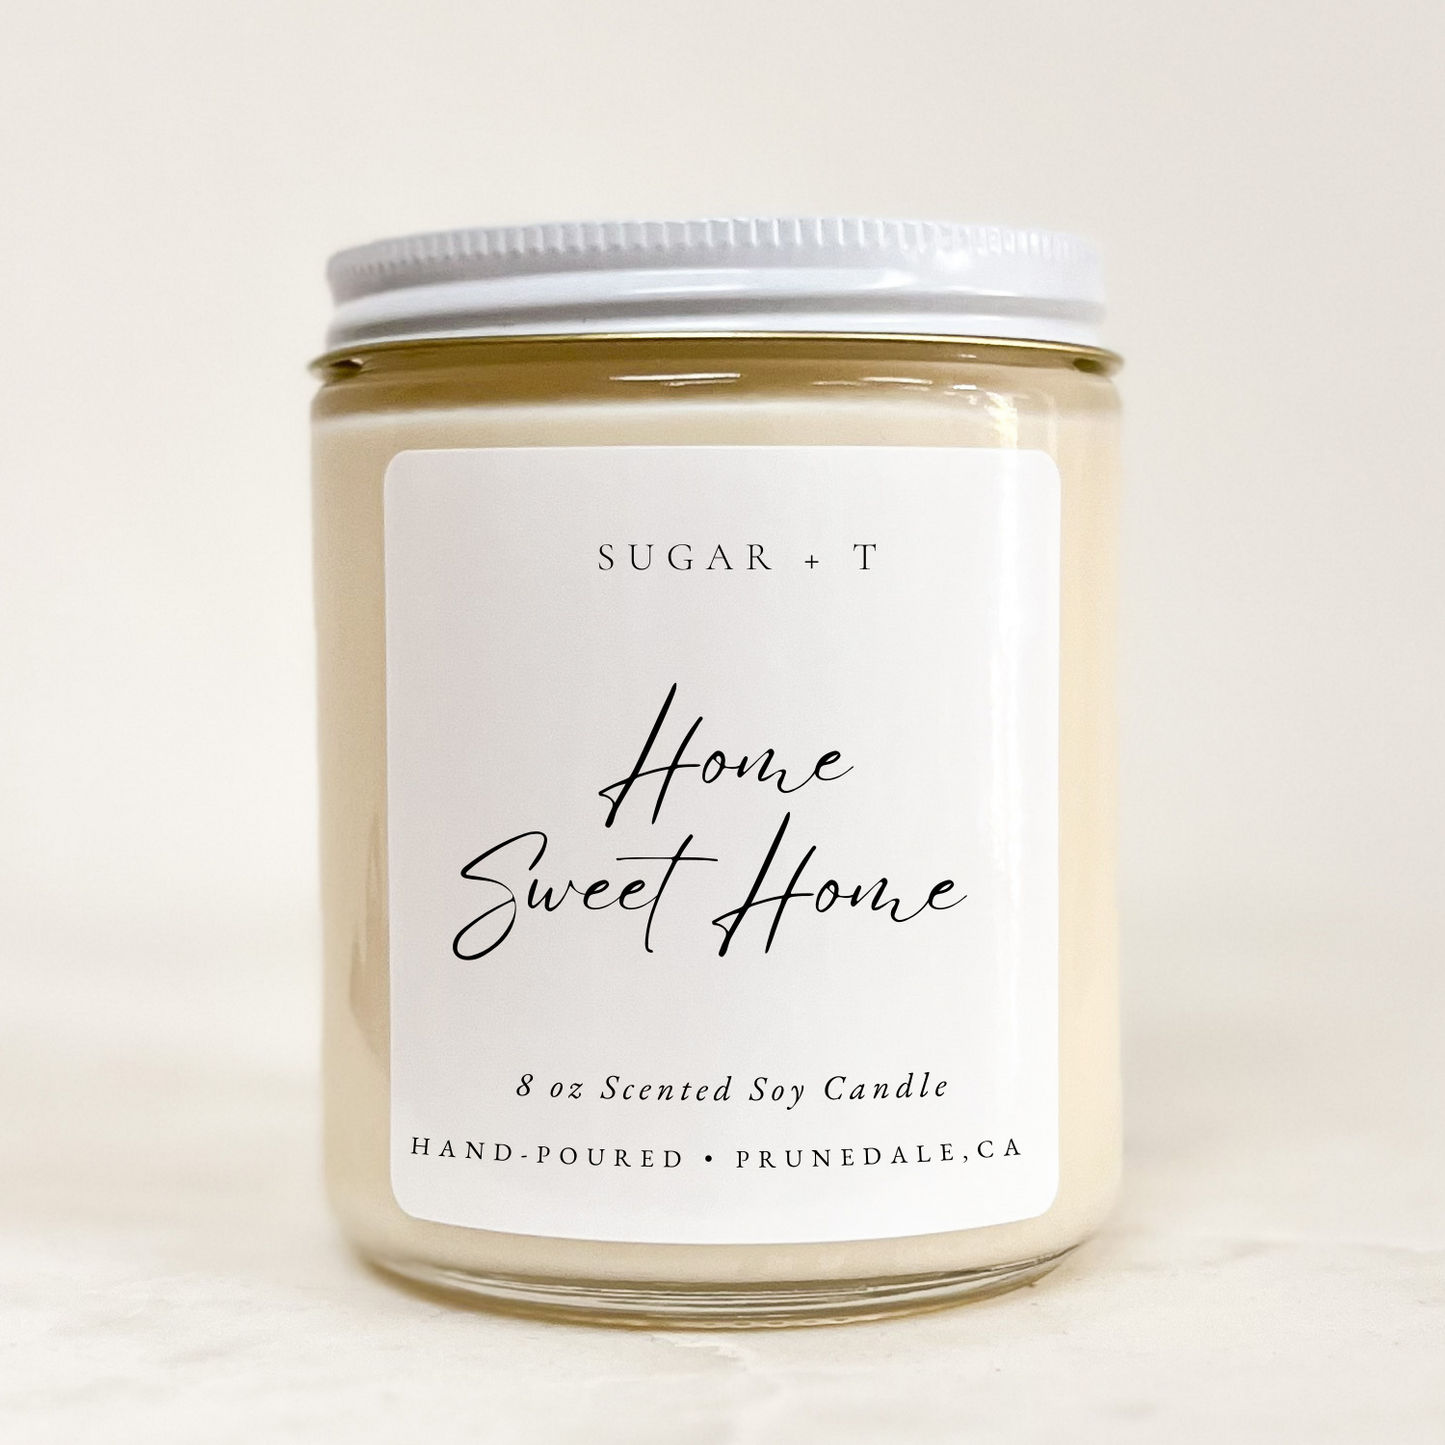 “Home Sweet Home” Scented Candle